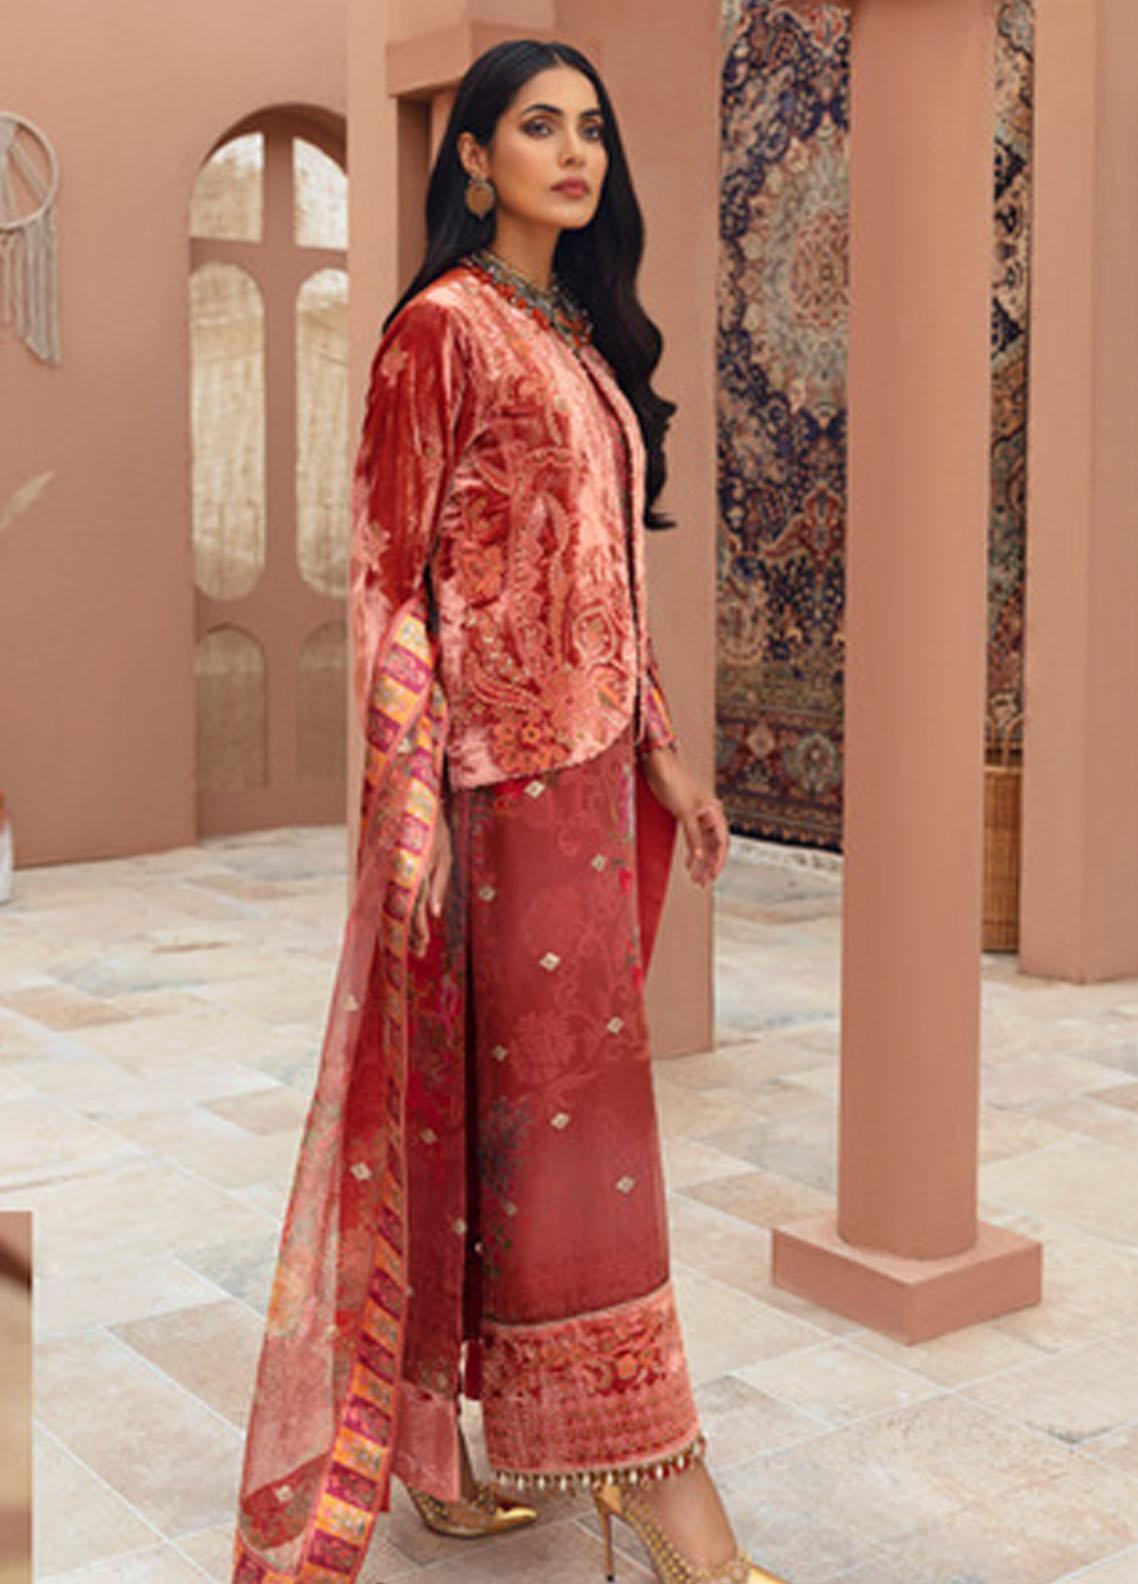 noor-by-saadia-asad-embroidered-shawls-2021-collection-04-_02